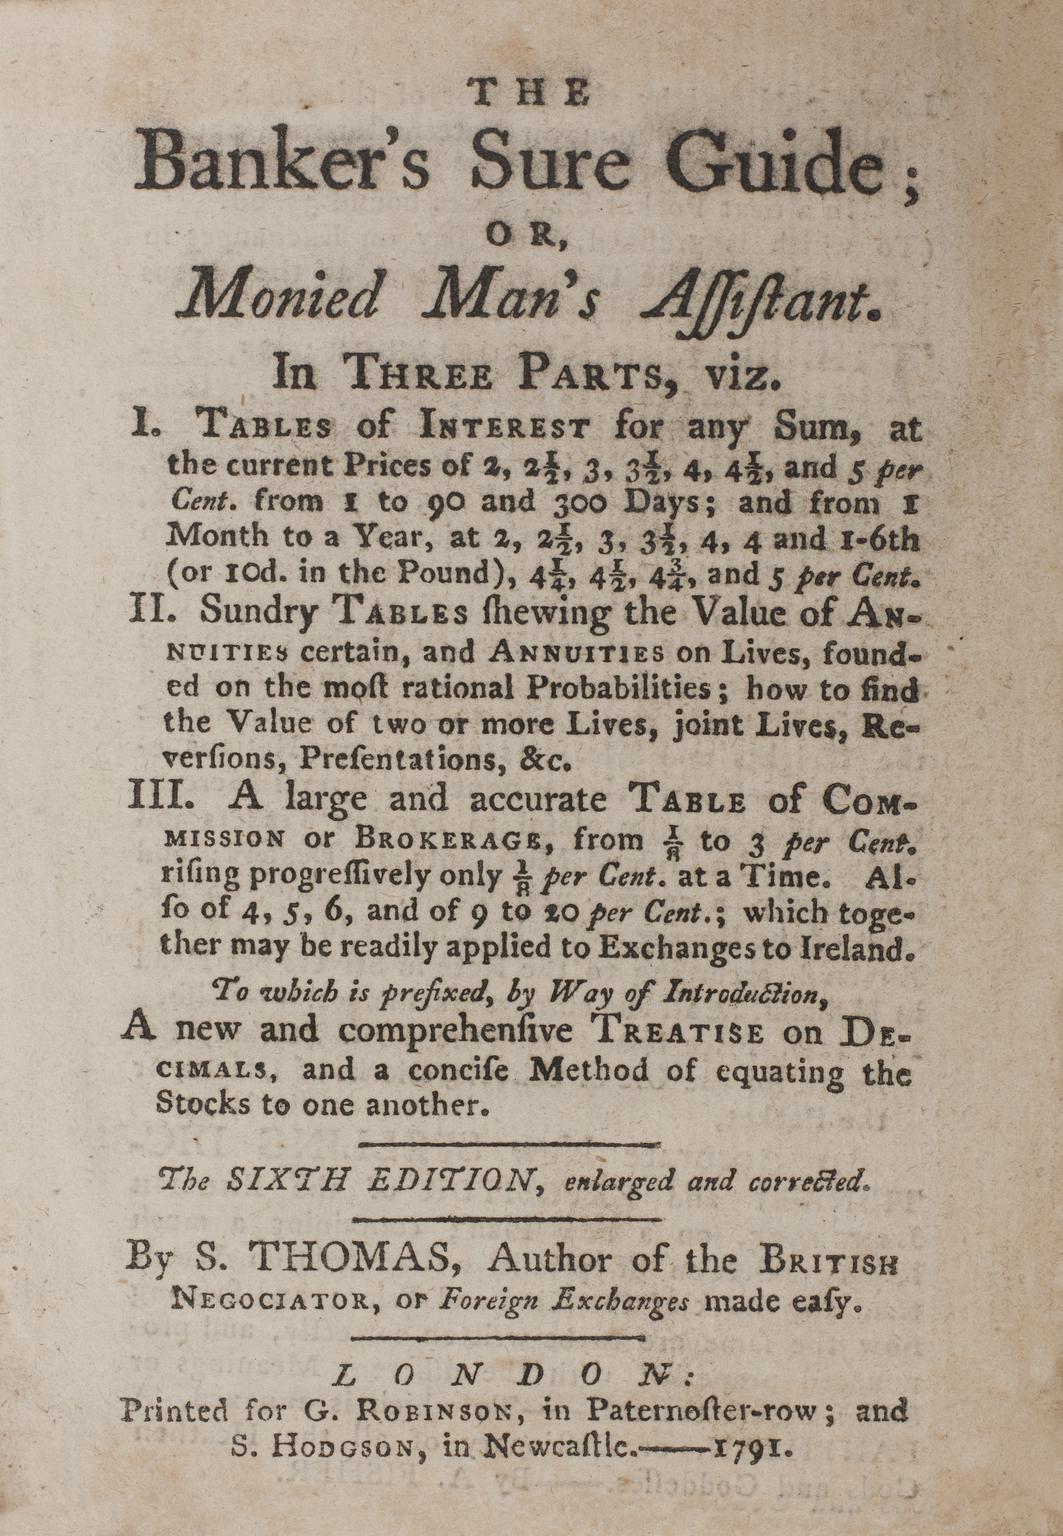 'The Banker's Sure Guide or Monied Man's Assistant' (book; ready reckoner)